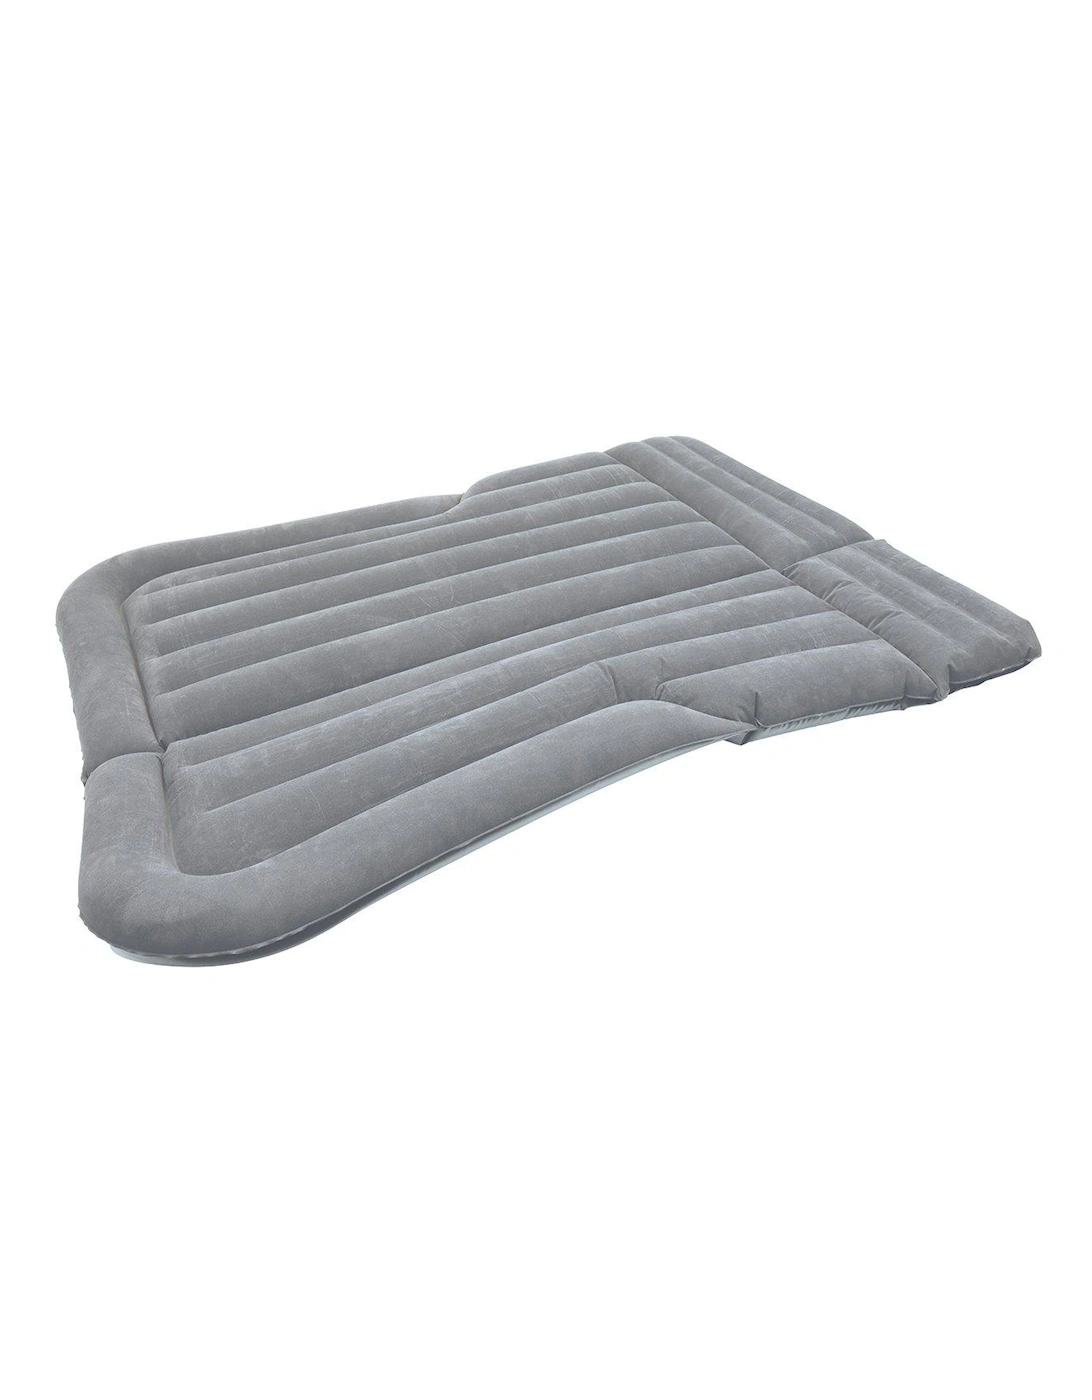 Air Bed For SUV's/Large Vehicles, 2 of 1